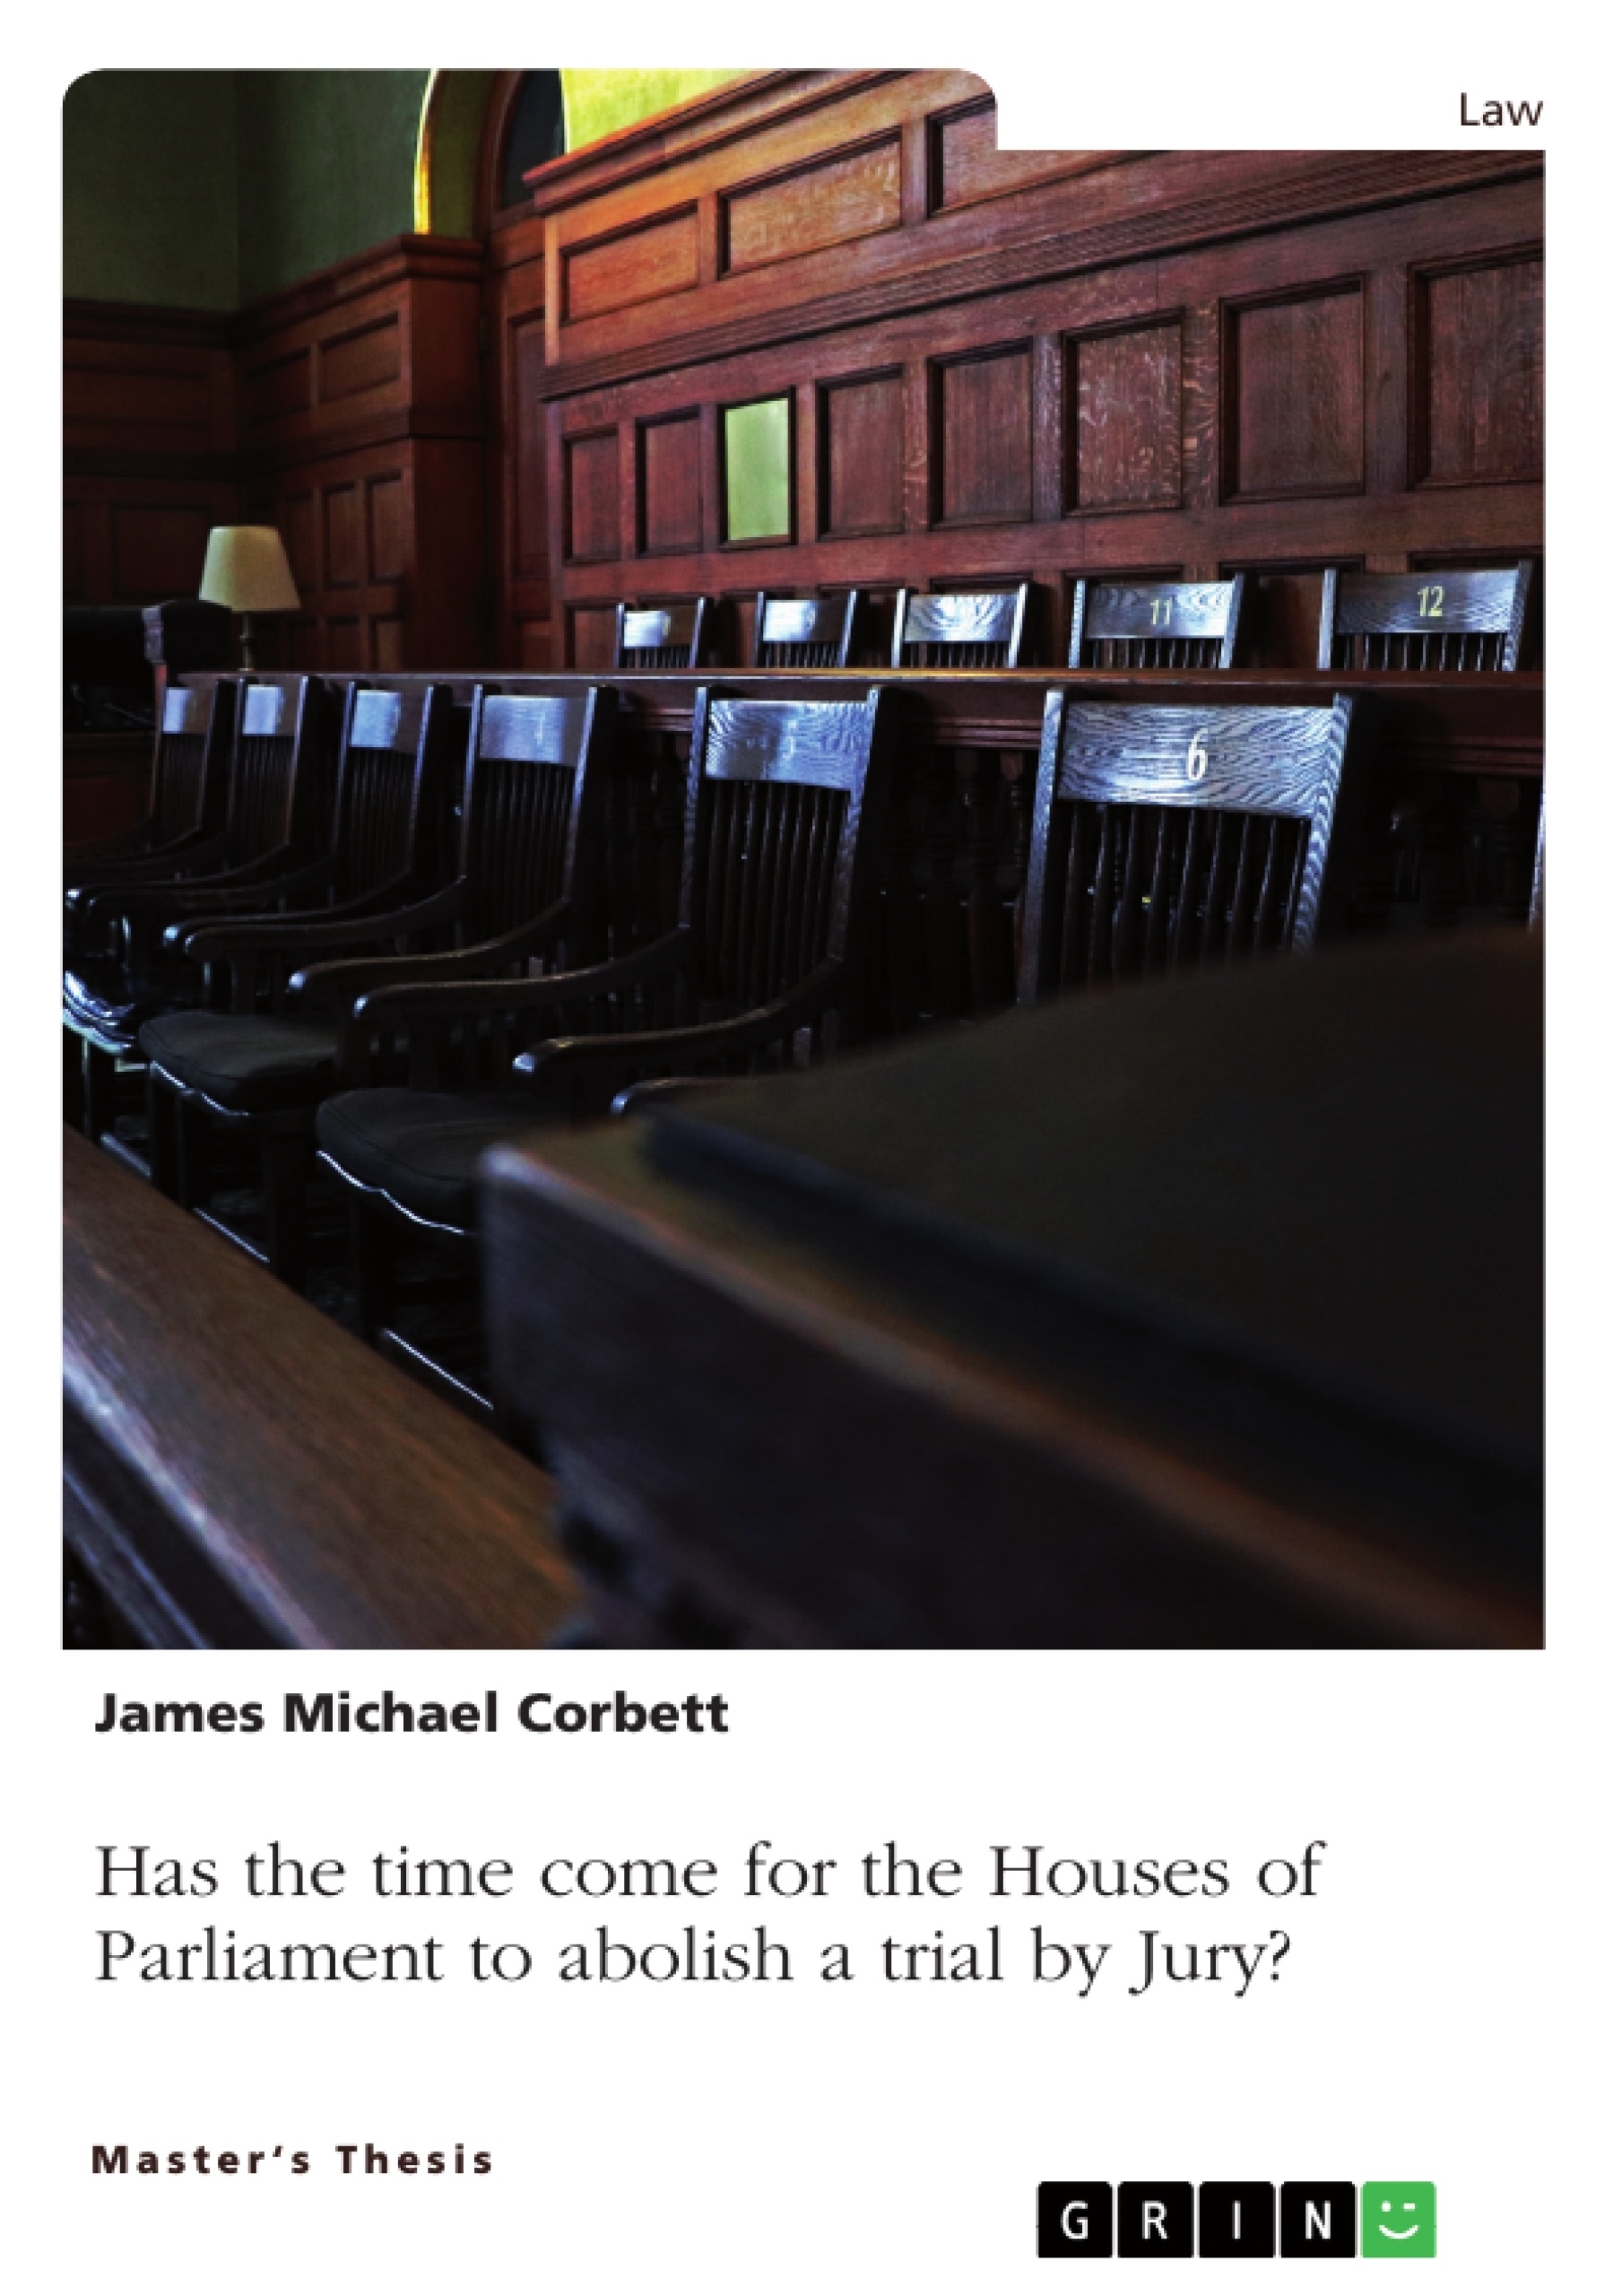 Title: Has the time come for the Houses of Parliament to abolish a trial by Jury, so that all Crown Court trials are heard by a Judge alone?